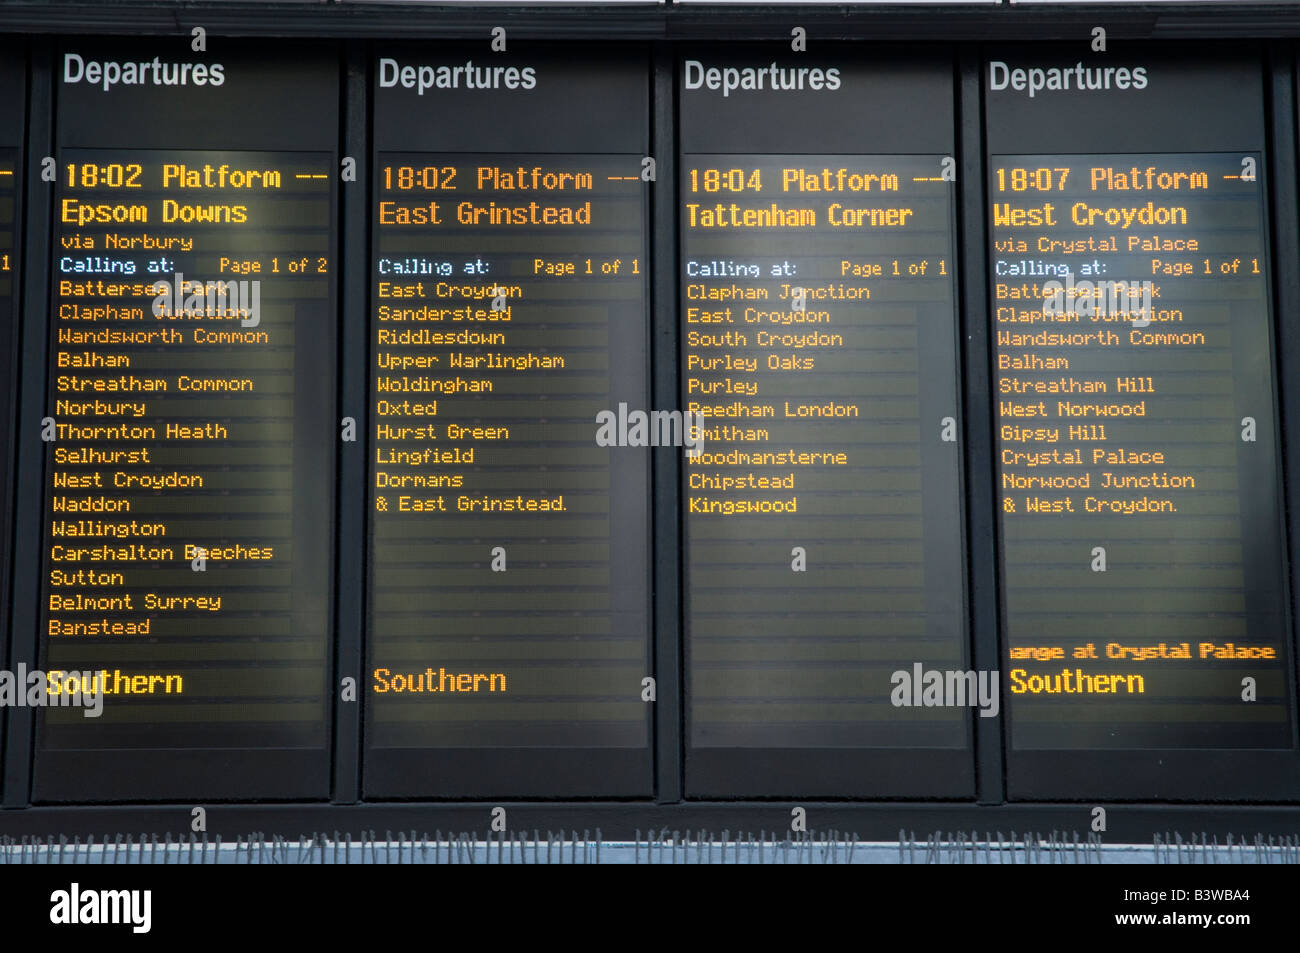 Departures board at Victoria Station London England UK Stock Photo